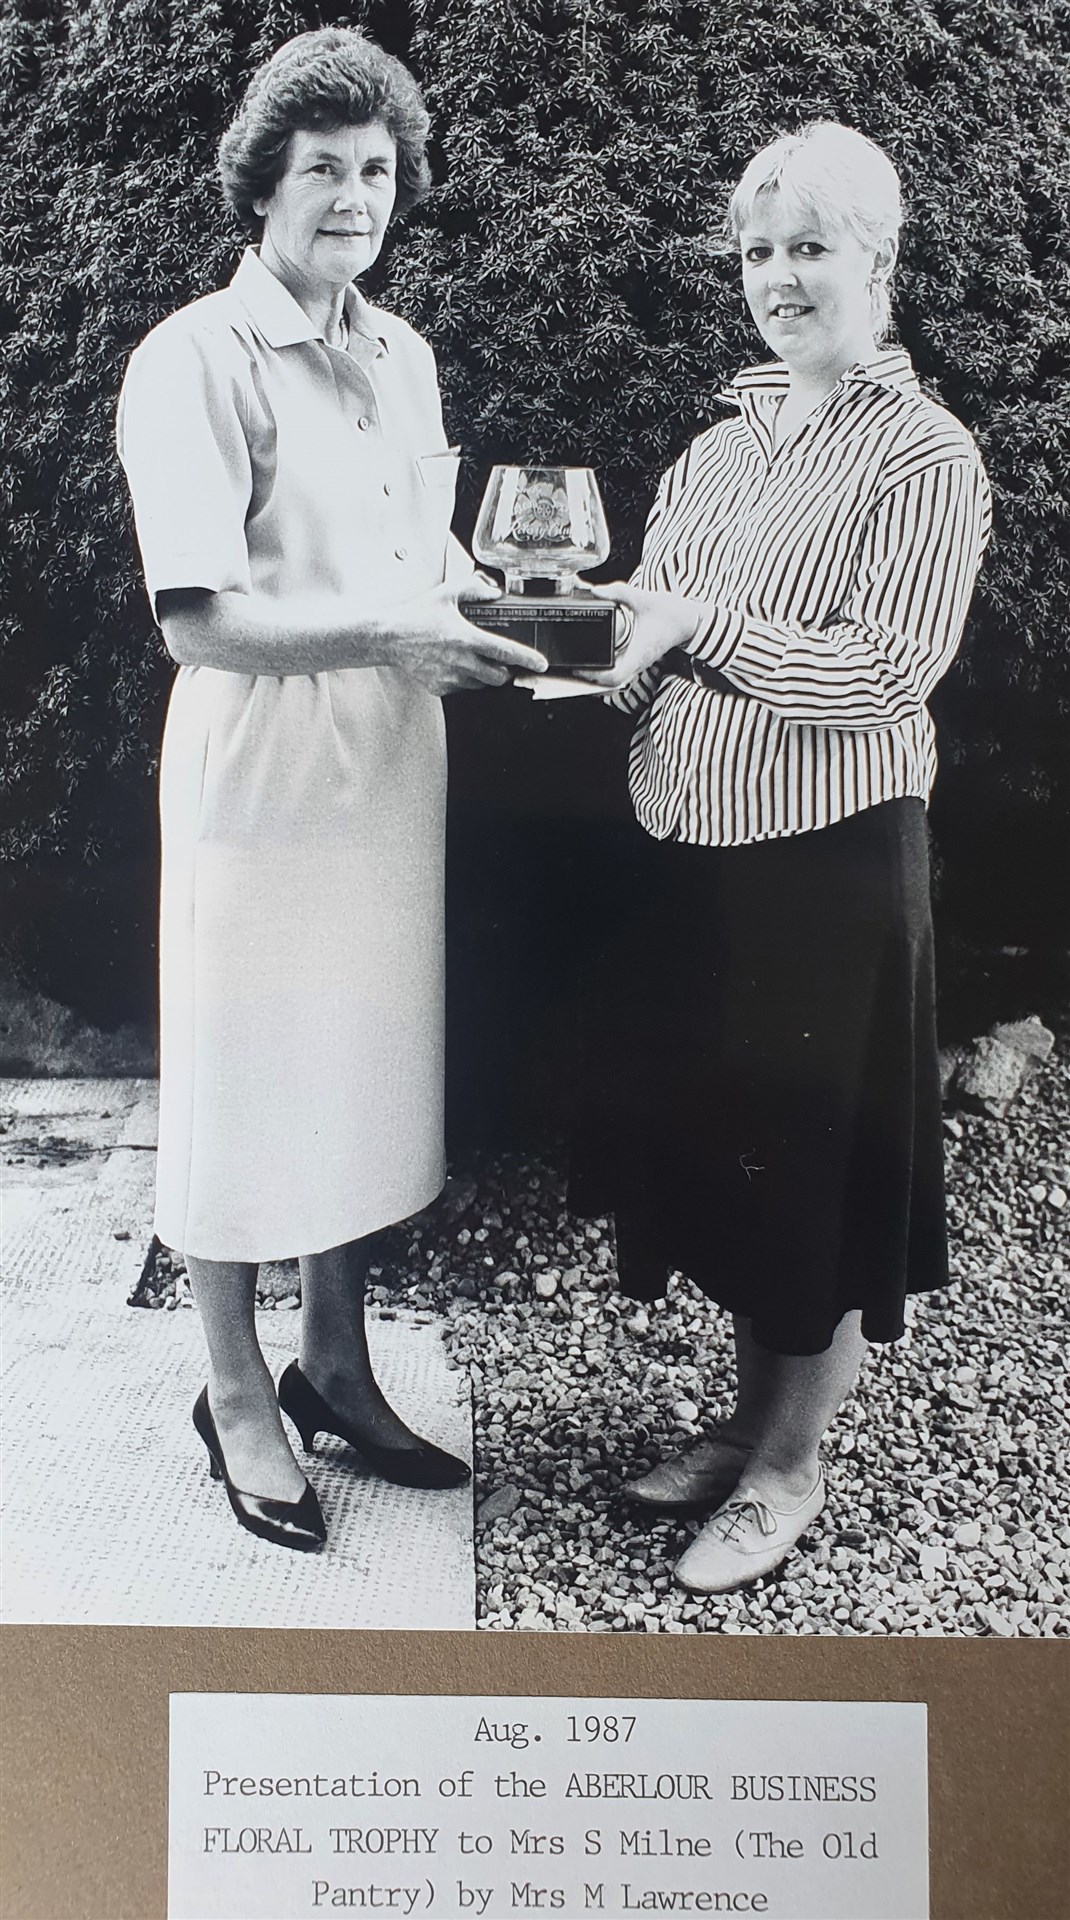 The presentation of the 1987 Aberlour Business Floral Trophy.